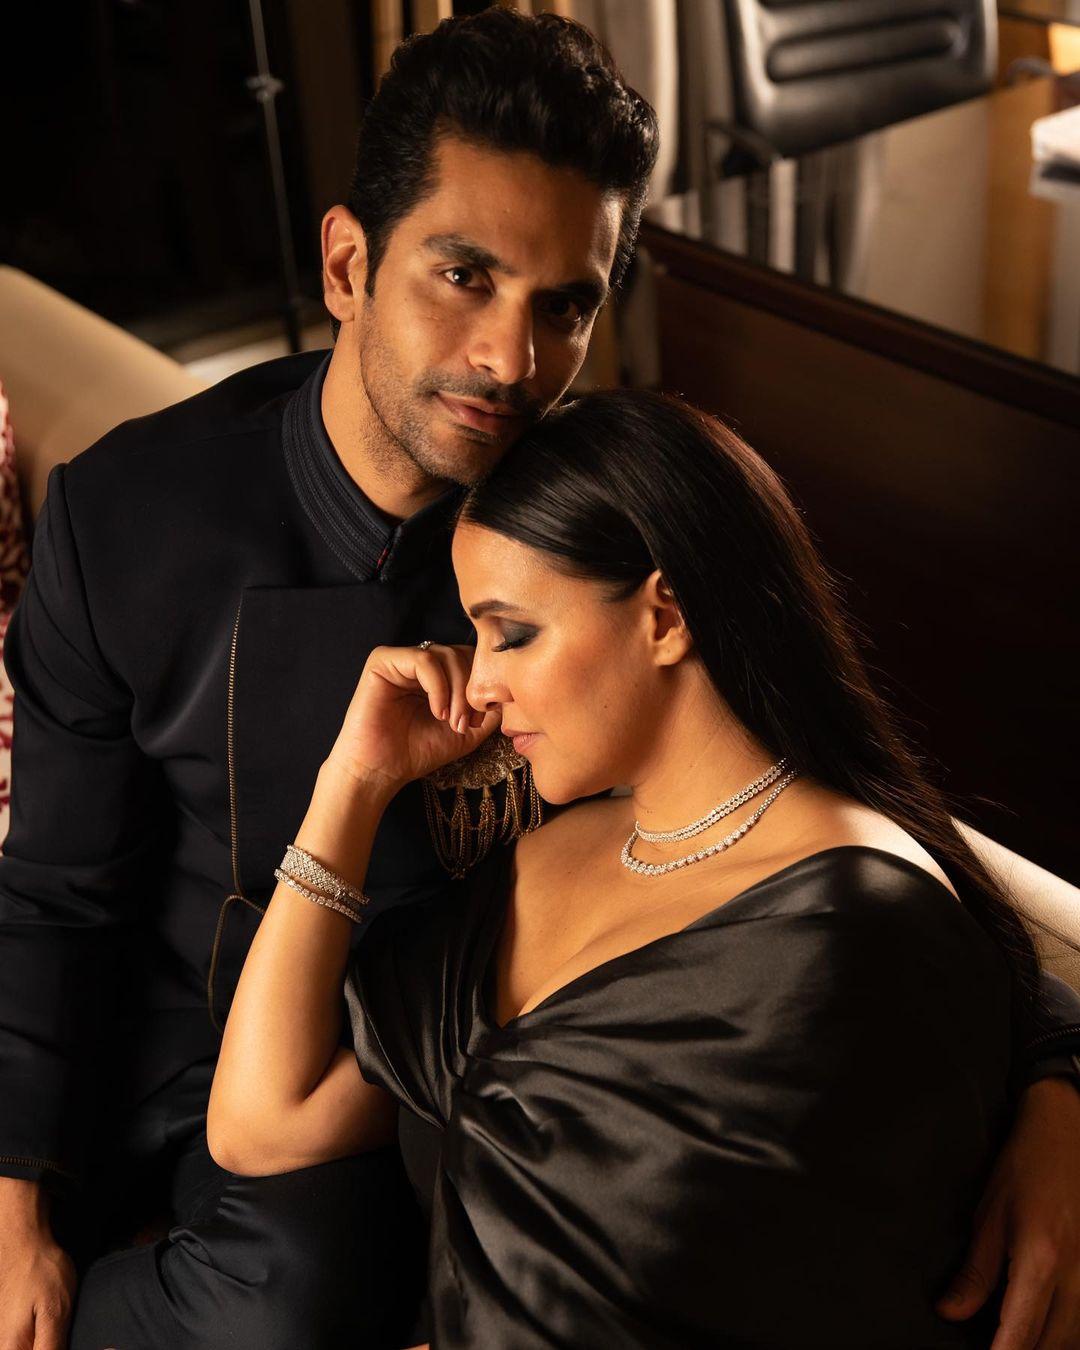 Neha Dhupia and Angad Bedi didn't have your typical Bollywood-style meet-cute. Instead of crossing paths on a movie set or a  flight, their story began at the gym. Bedi recalls spotting Dhupia for the first time when she was just 20, back in New Delhi. Years later, their lives intersected again at a friend's party in Mumbai. 